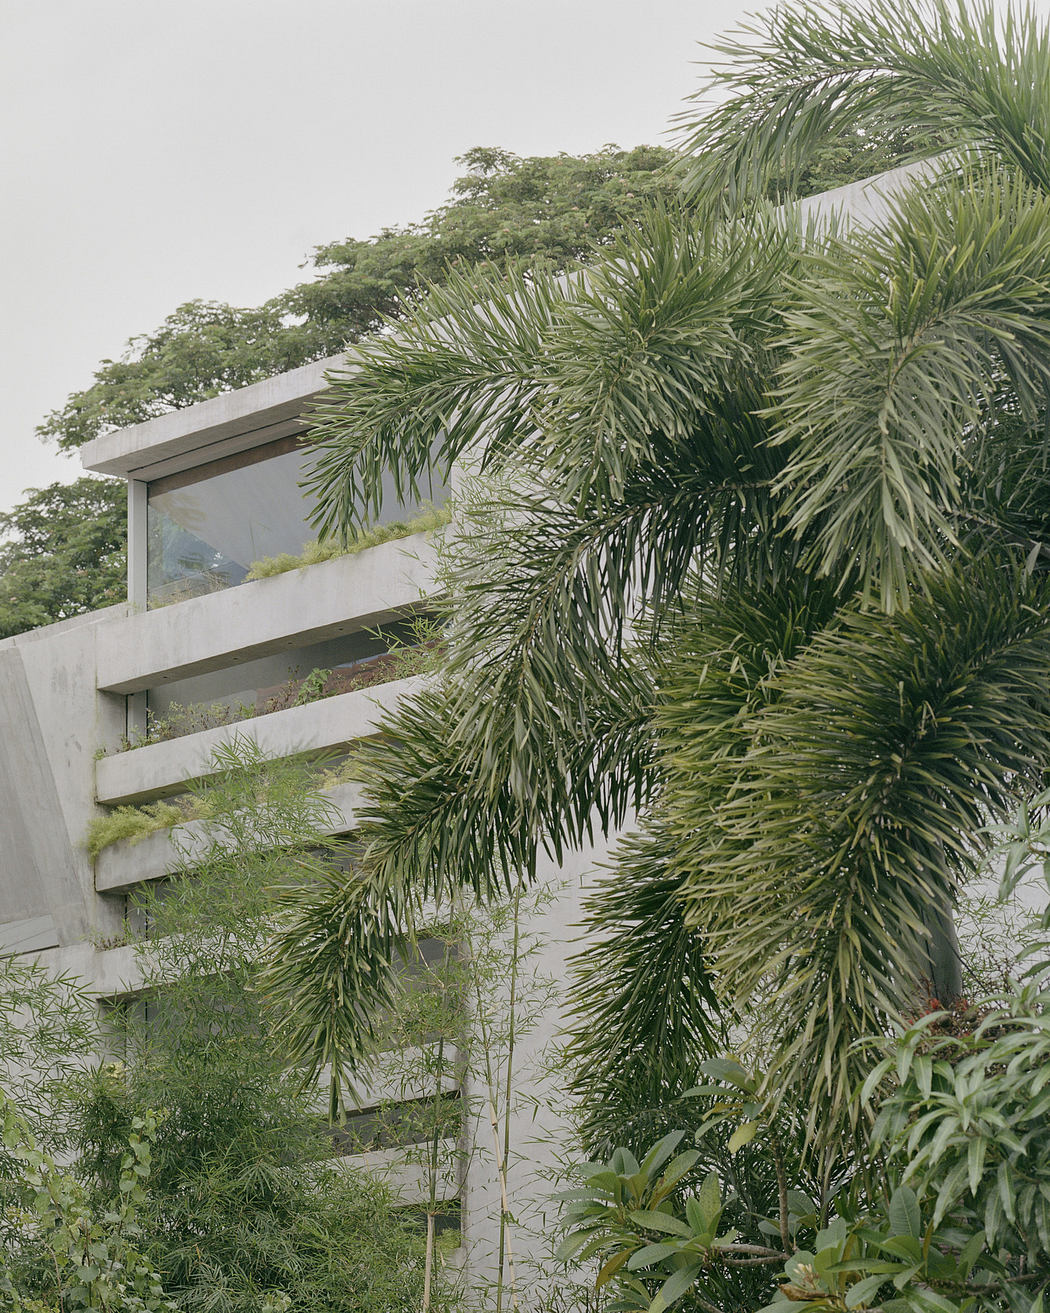 Modern concrete building with lush greenery.